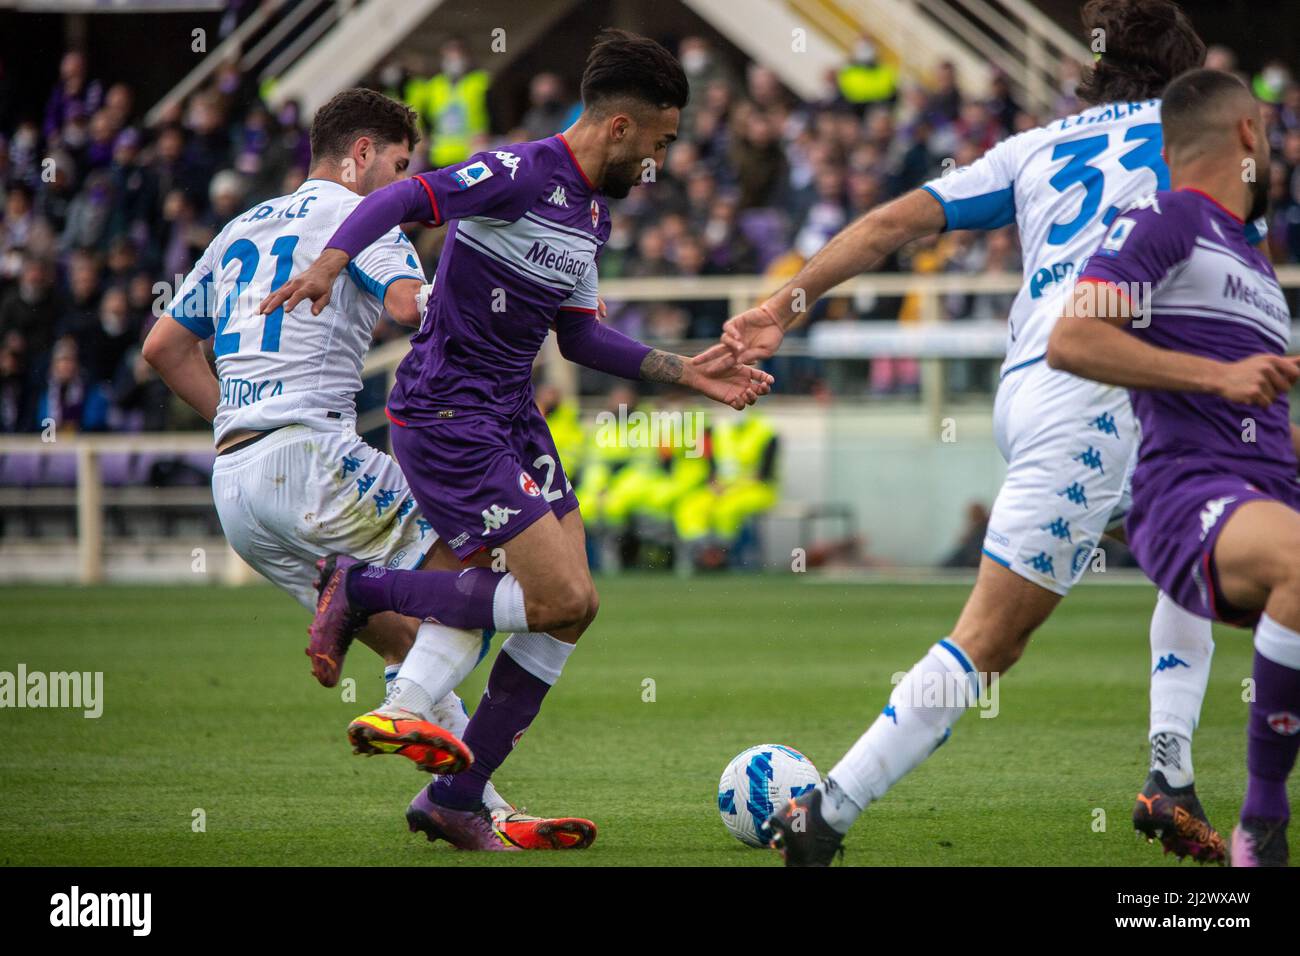 Gonzalez Fiorentina carries the ball during the italian soccer Serie A  match ACF Fiorentina vs Empoli FC on April 03, 2022 at the Artemio Franchi  stadium in Florence, Italy (Photo by Valentina